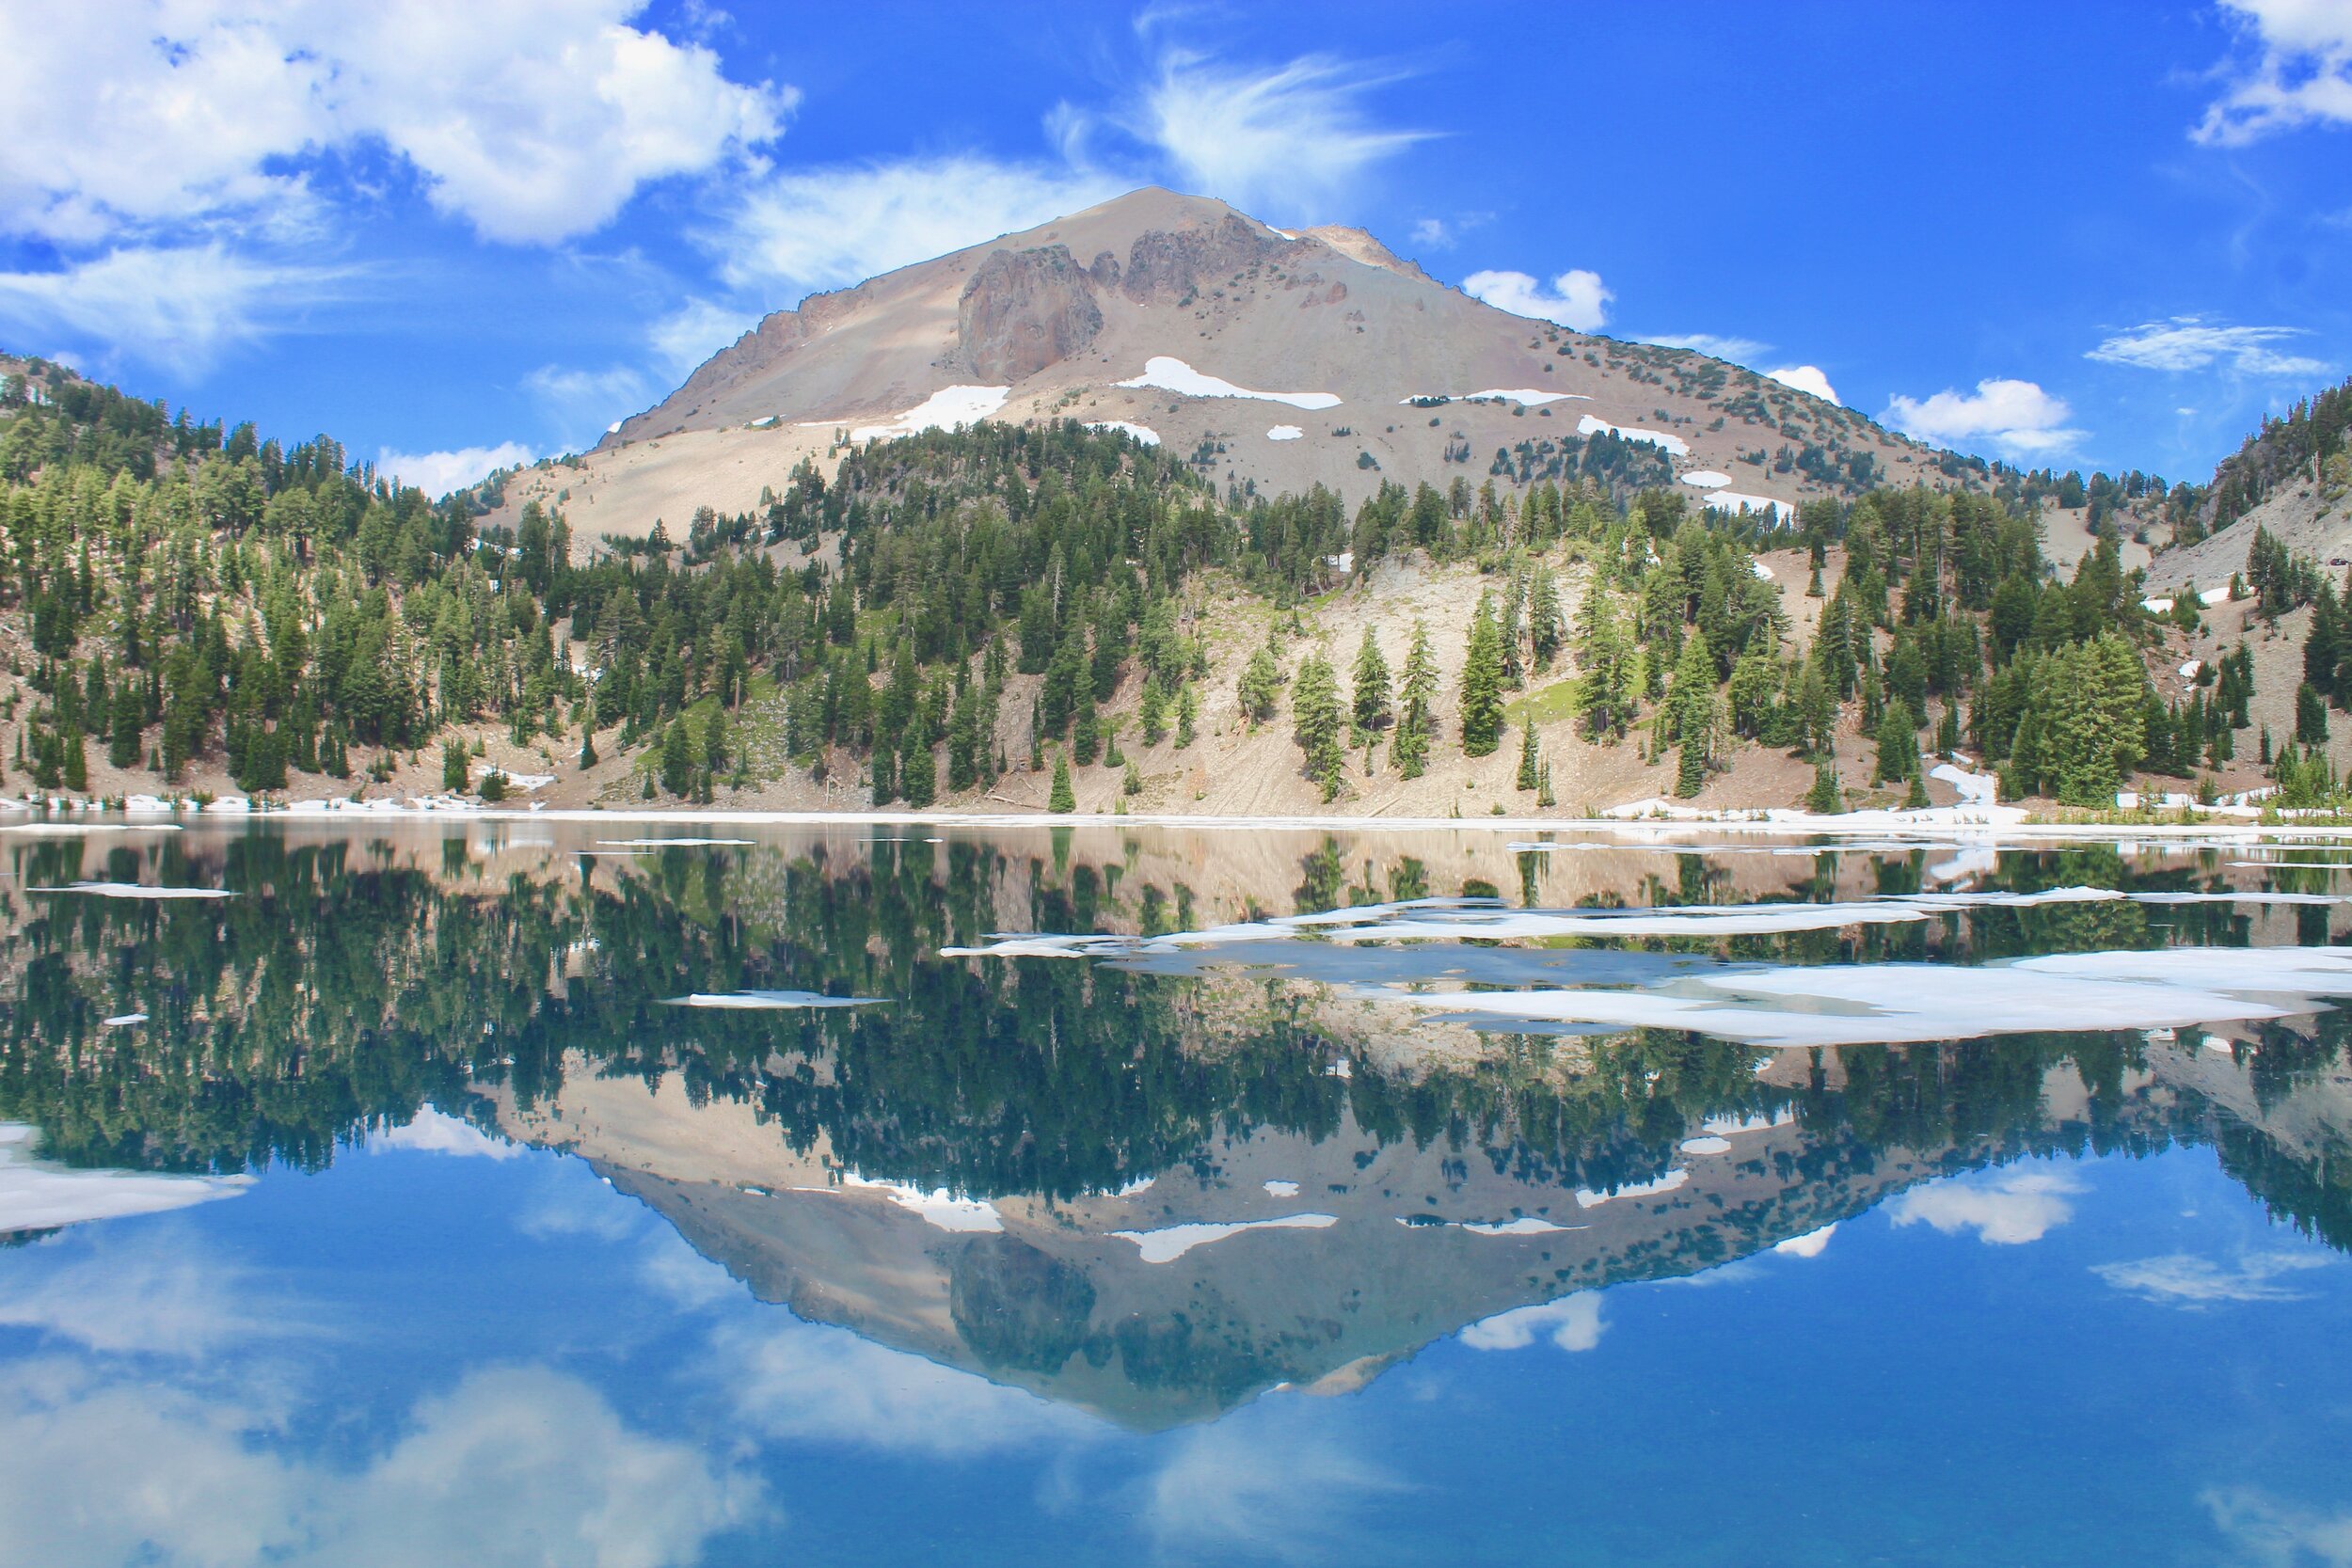 The AFT Guide to Lassen Volcanic National Park - American Field Trip